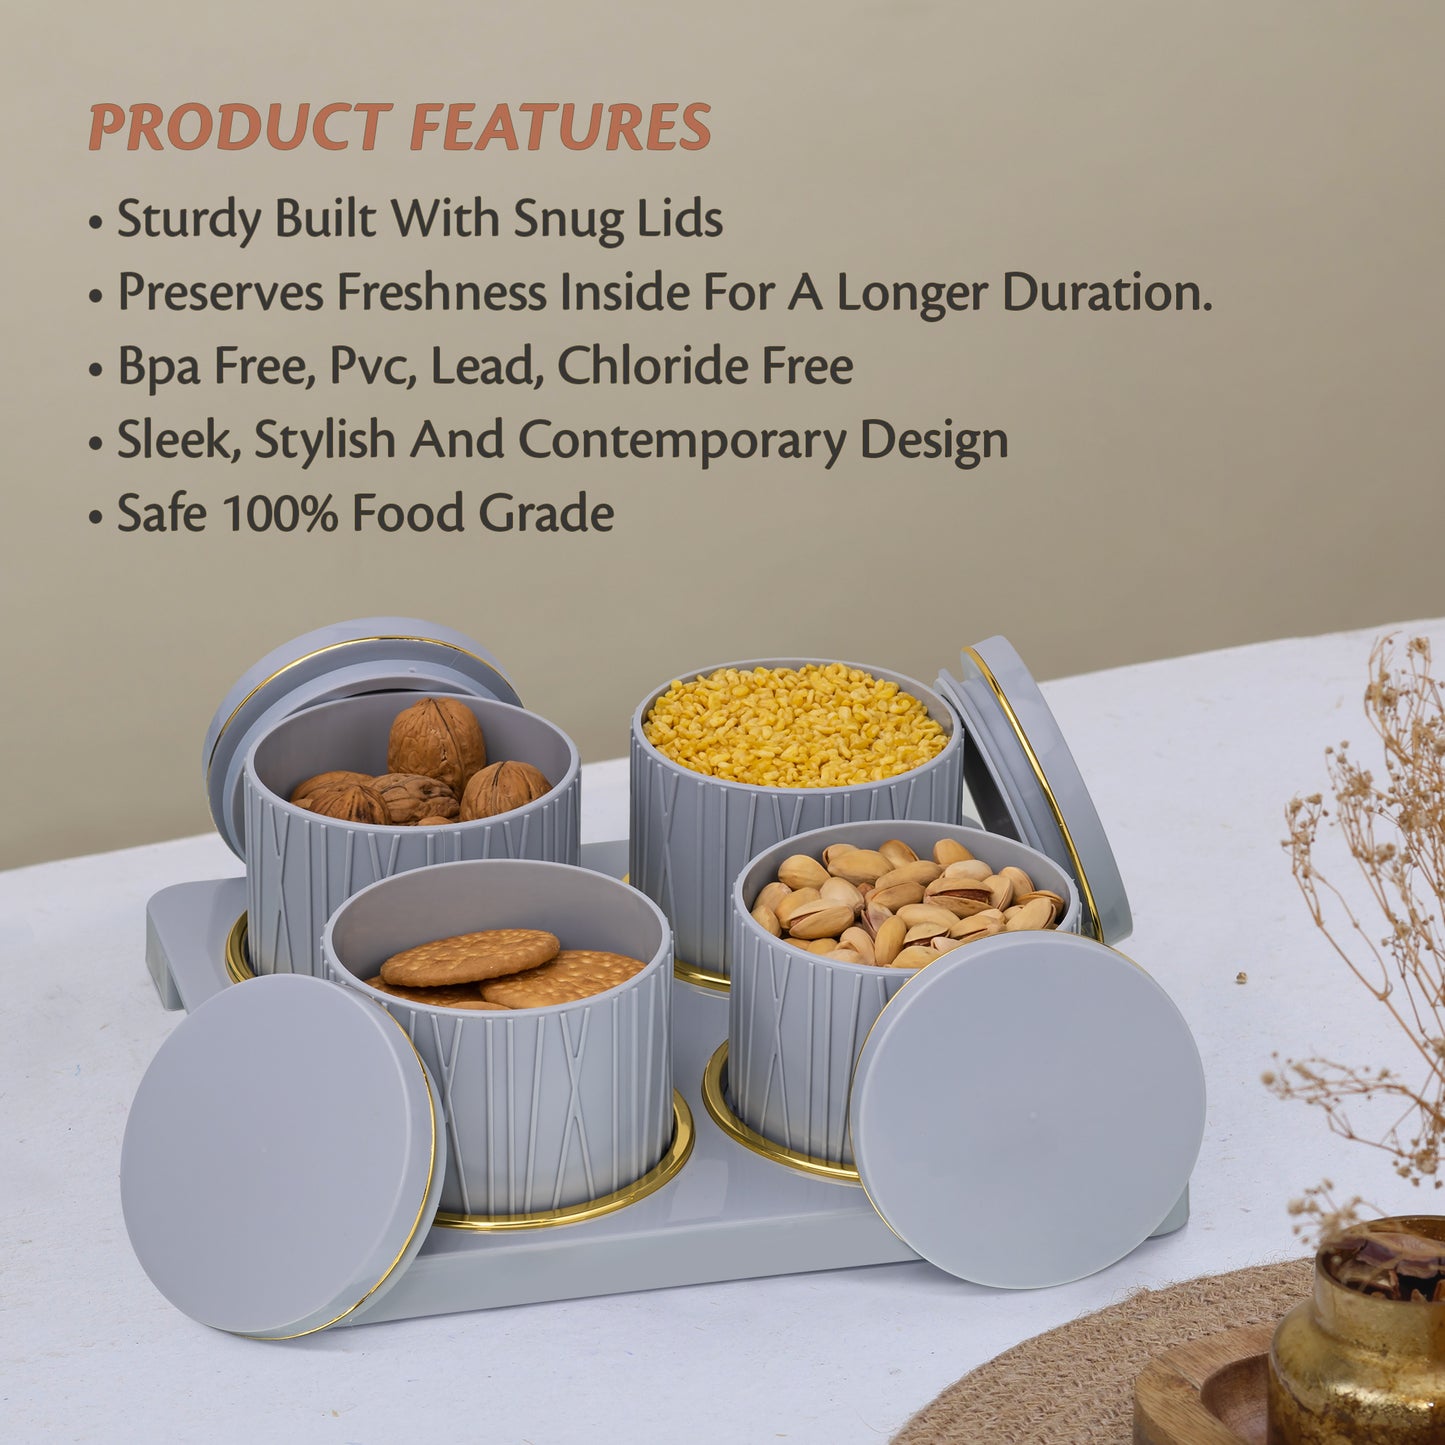 SELVEL Dune Airtight Dry Fruit Container Tray Set - 4 Pieces (450ml) - Bluish Grey Polypropylene with Subtle Gold Rim